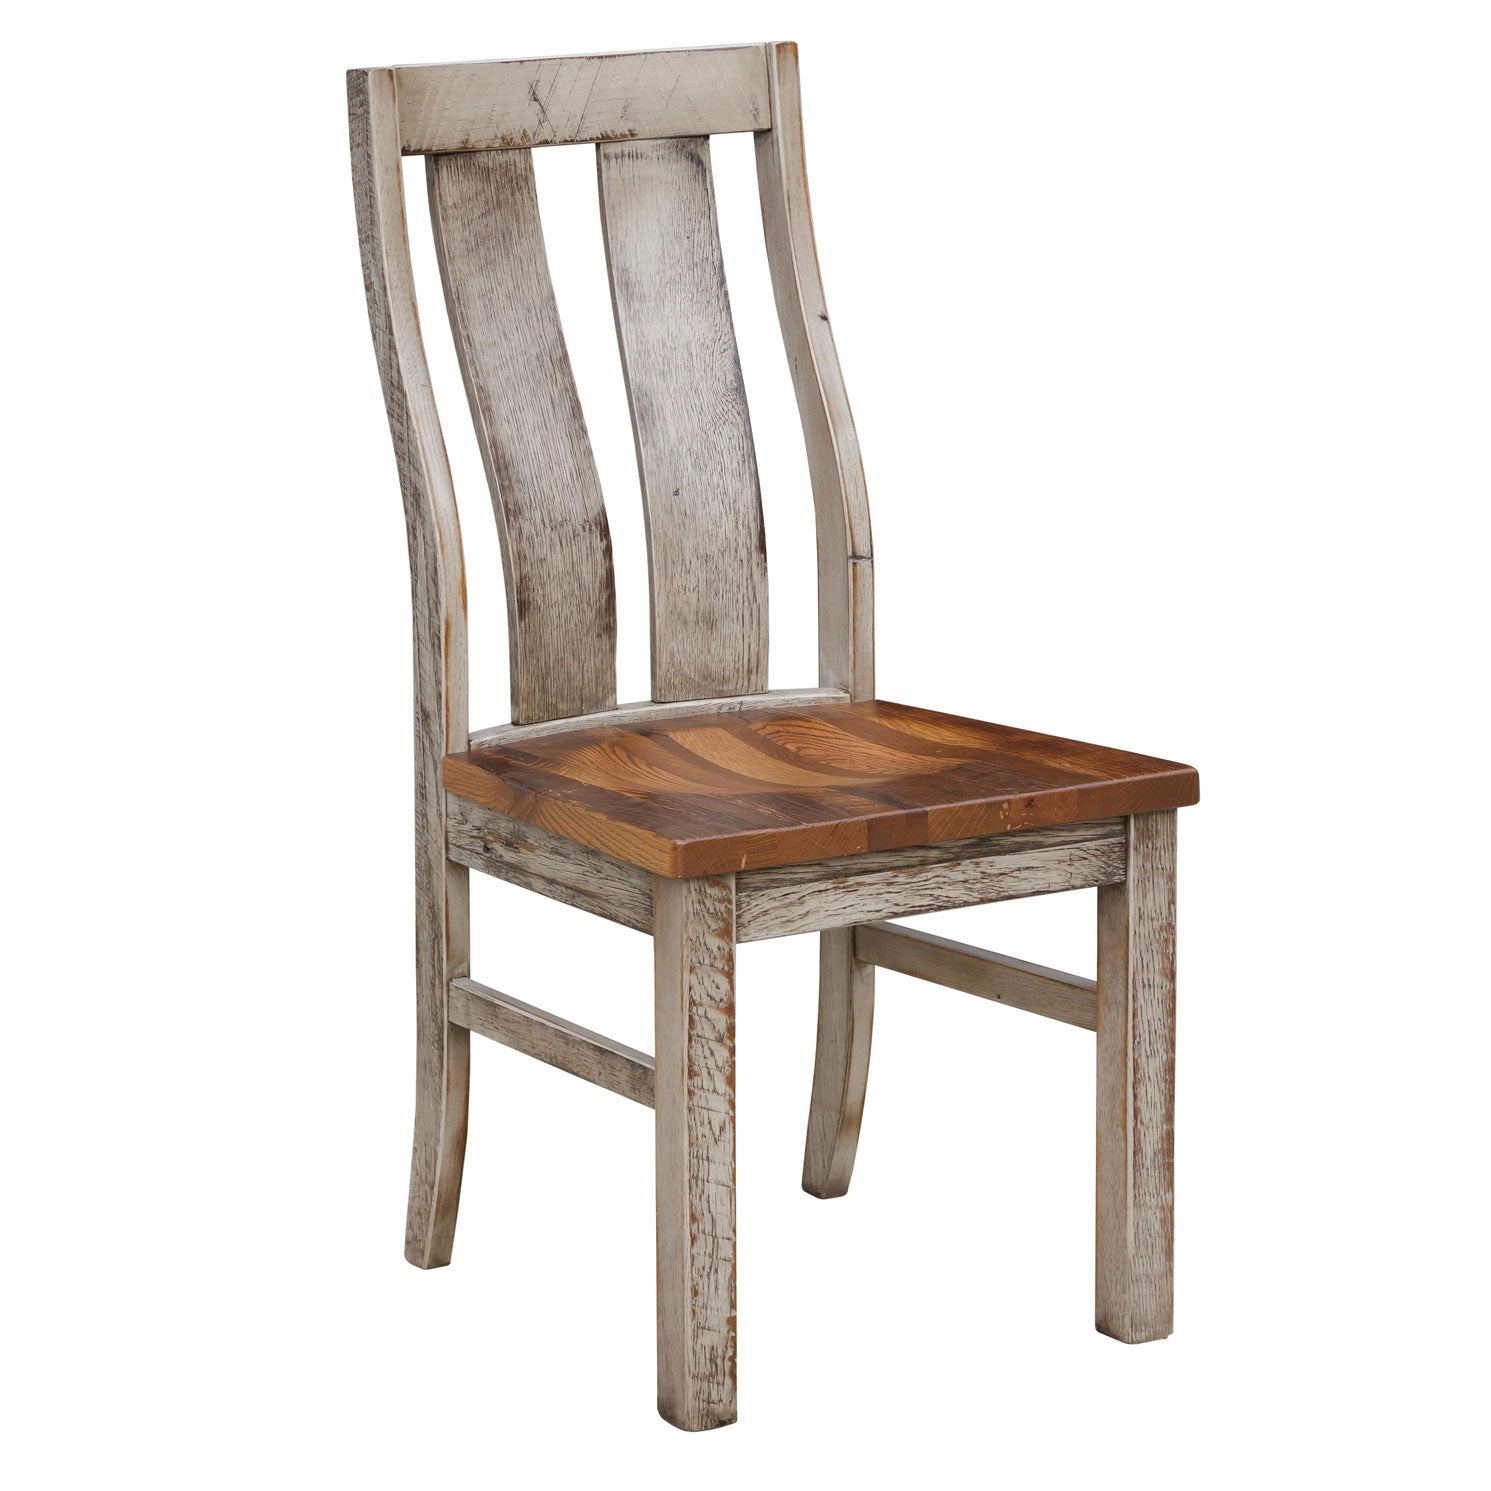 Silverton Barnwood Chair - snyders.furniture